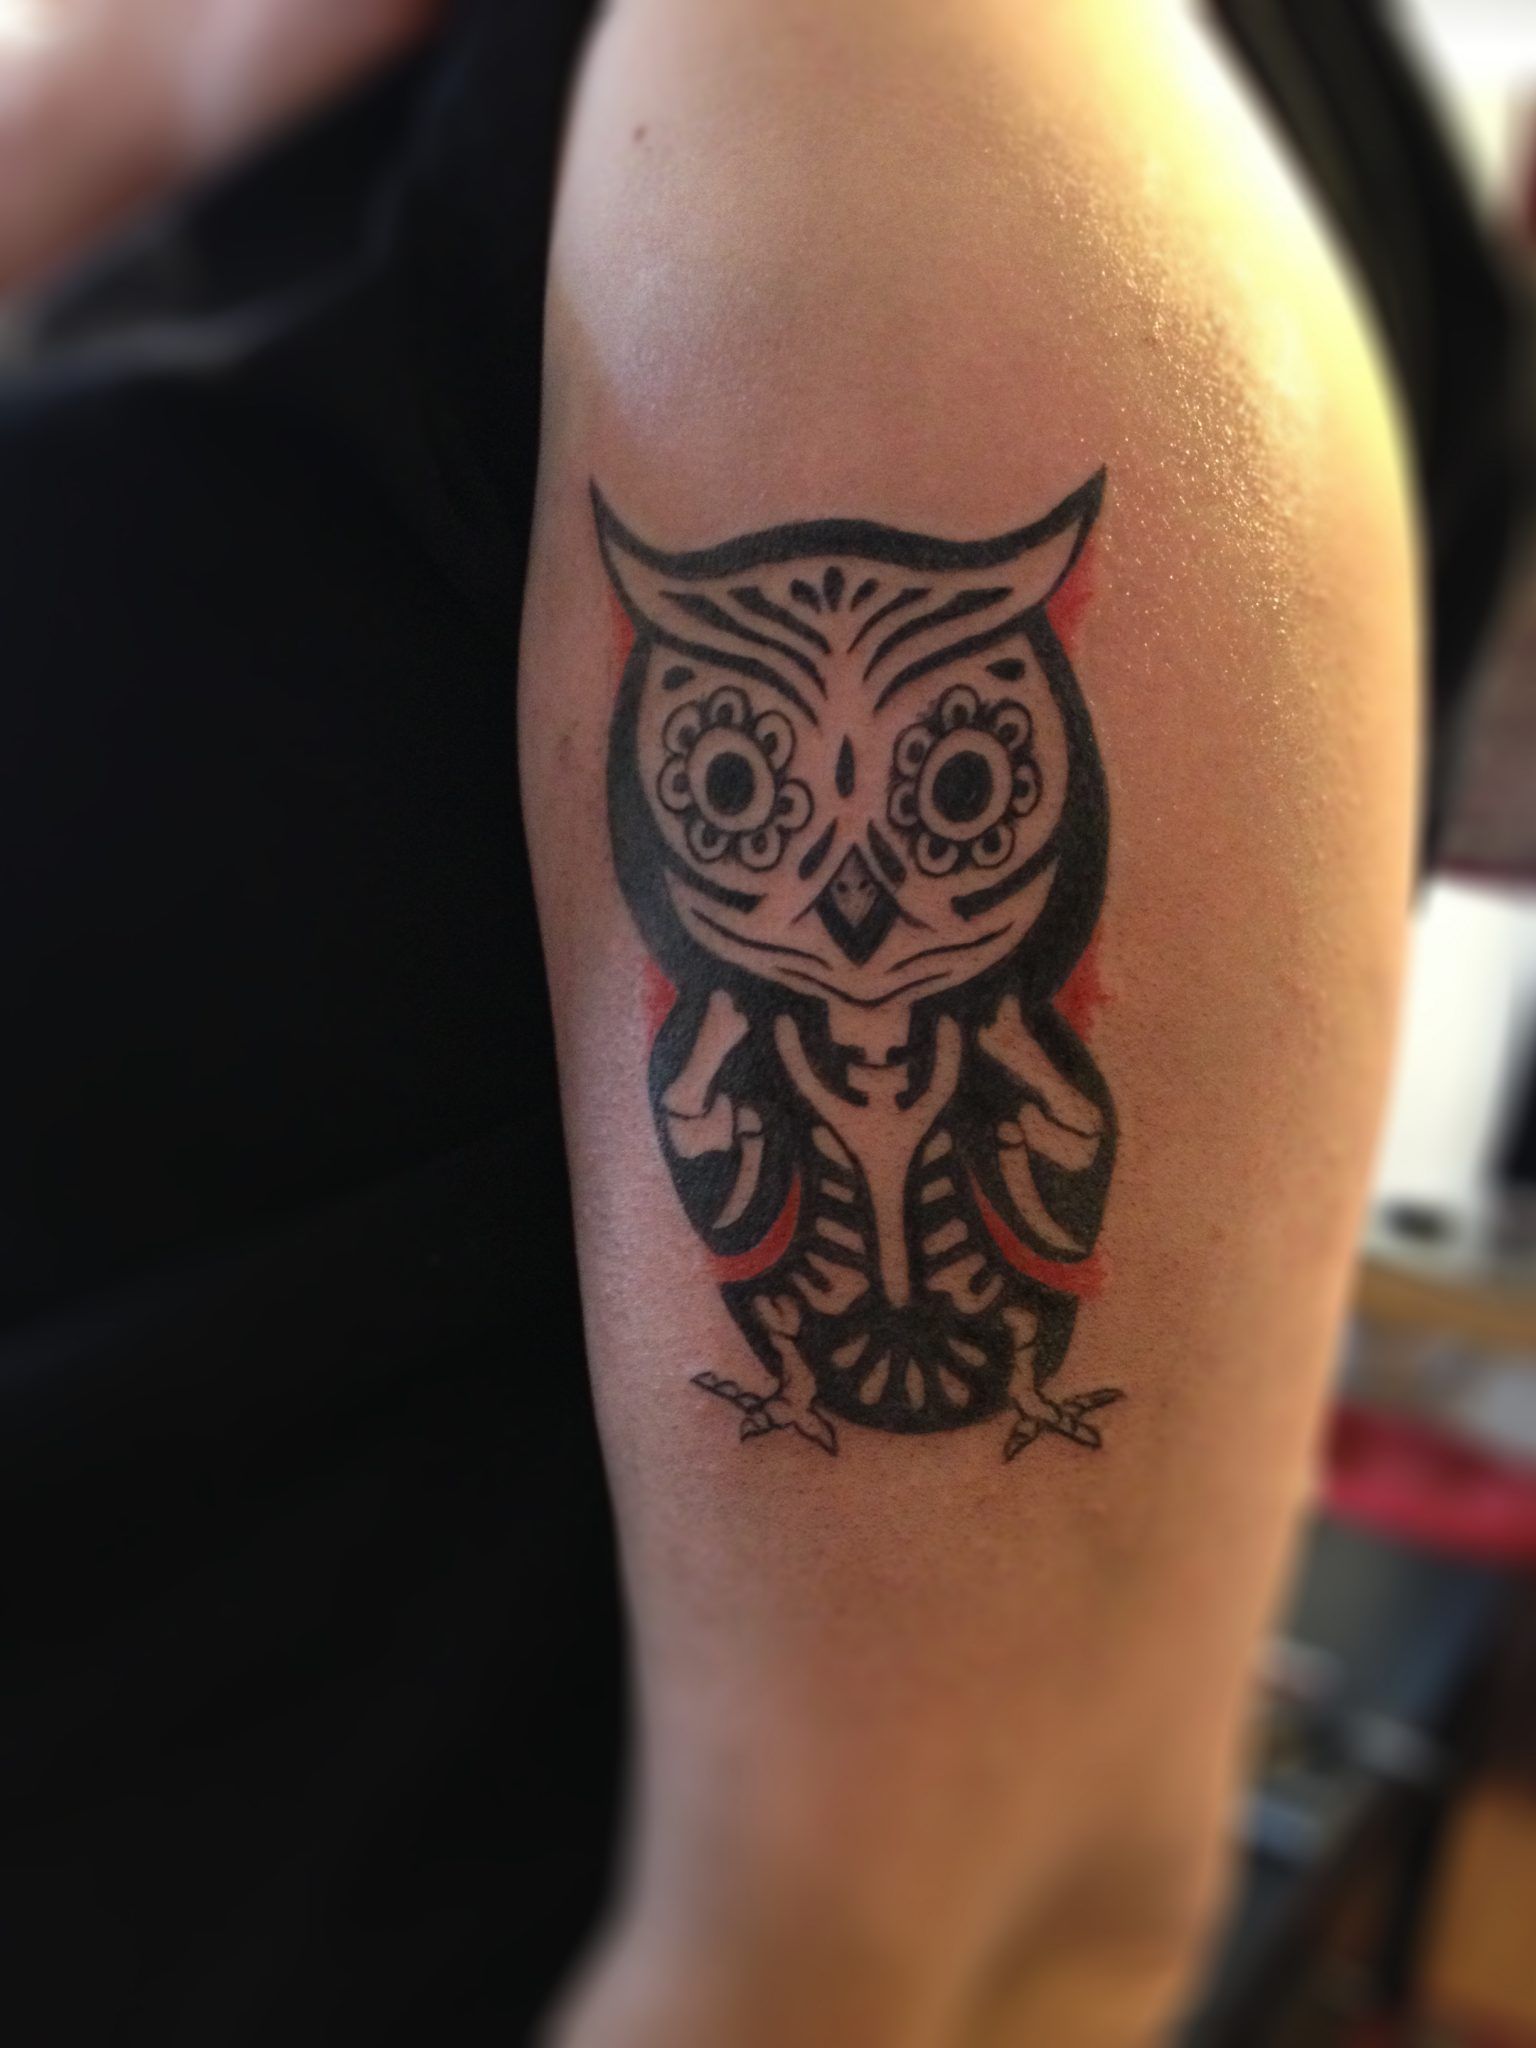 Cute Owl Tattoos Owl Tattoos Are Very Popular, Here Are The Cutest! -   owl tattoos